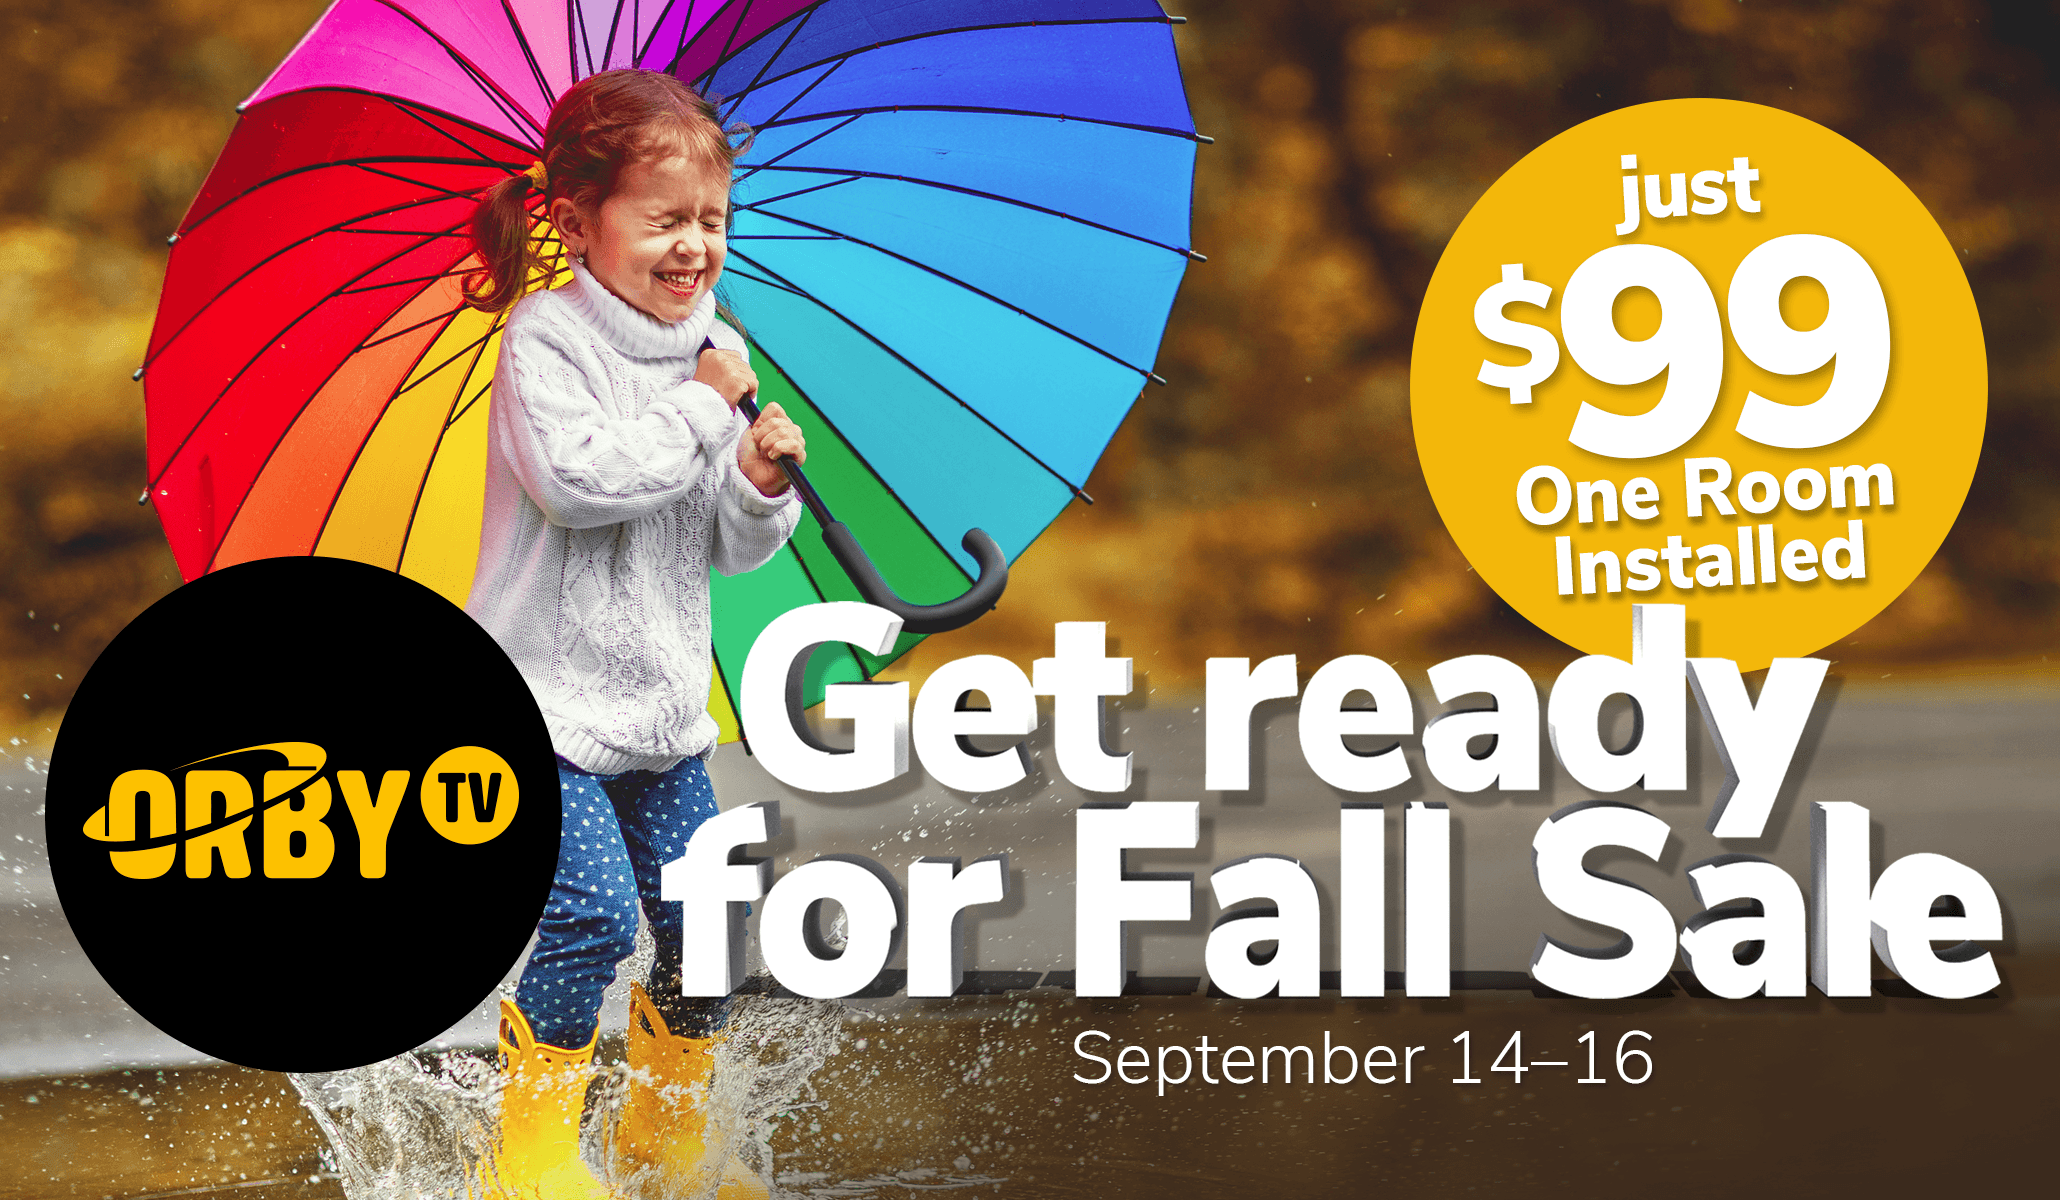 Orby TV’s Fall Sale Starts Today